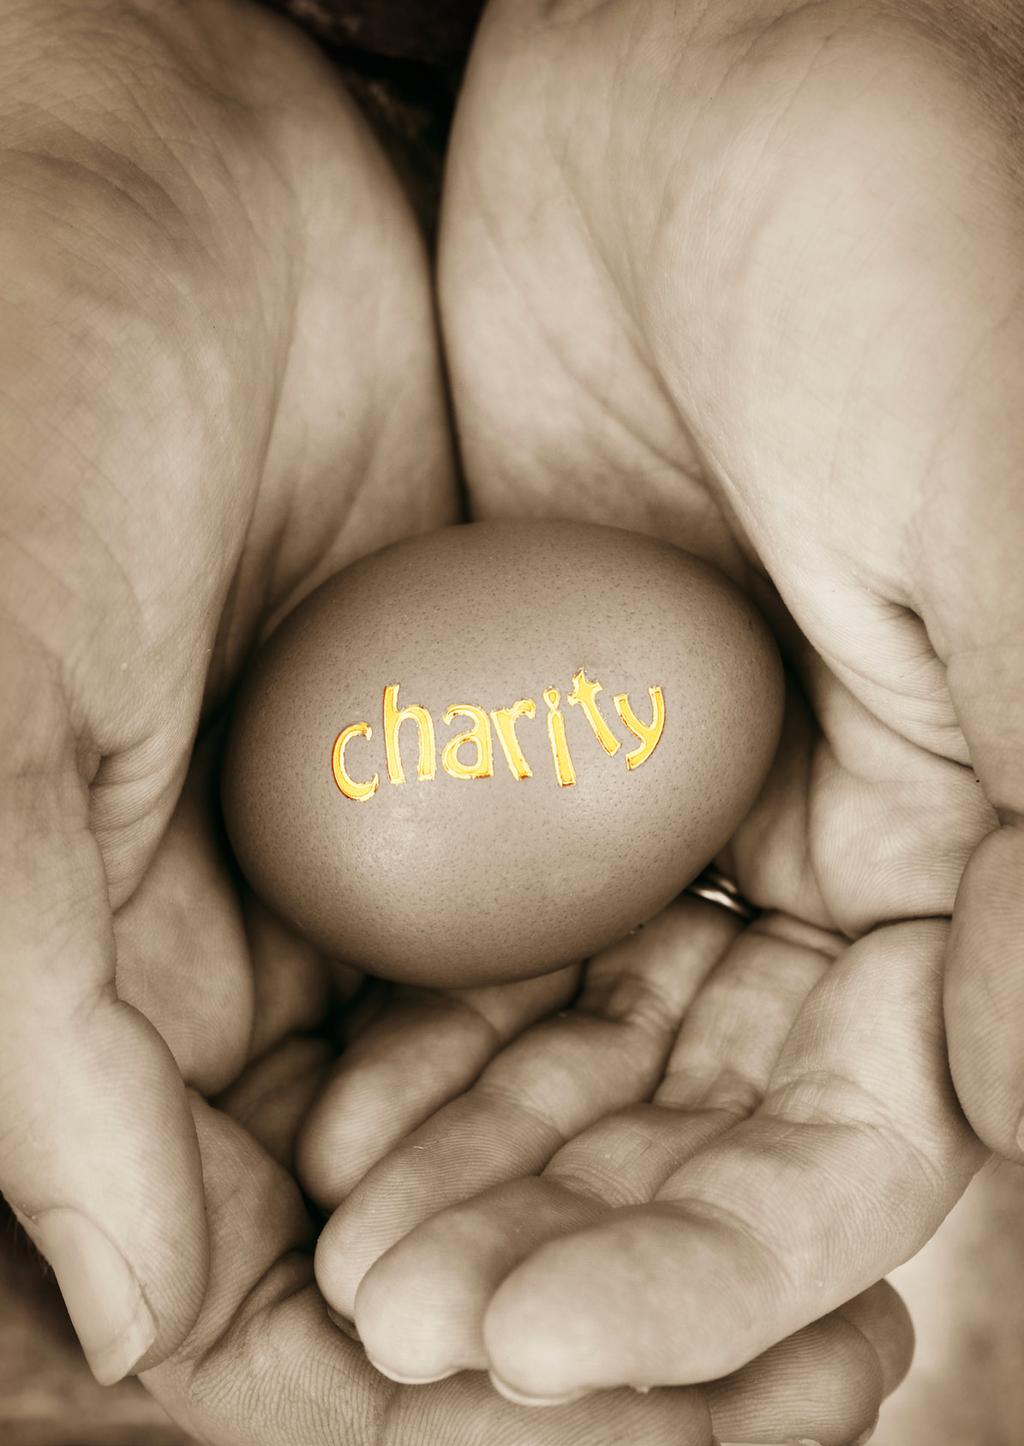 Charity How transparent is your senior executive pay?